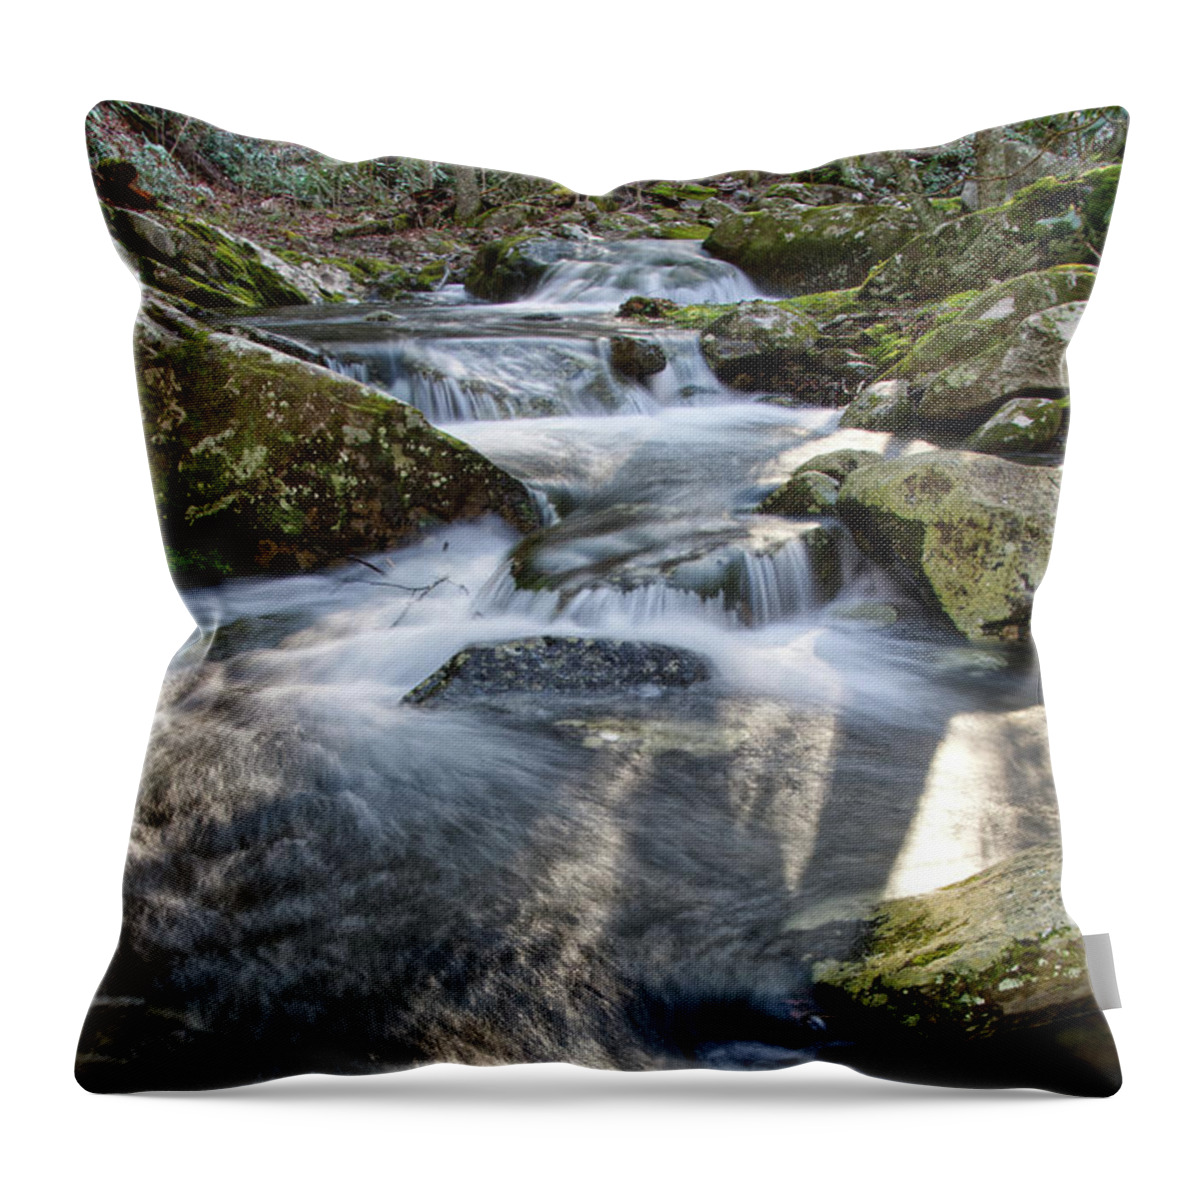 Middle Prong Trail Throw Pillow featuring the photograph Lynn Camp Prong by Phil Perkins